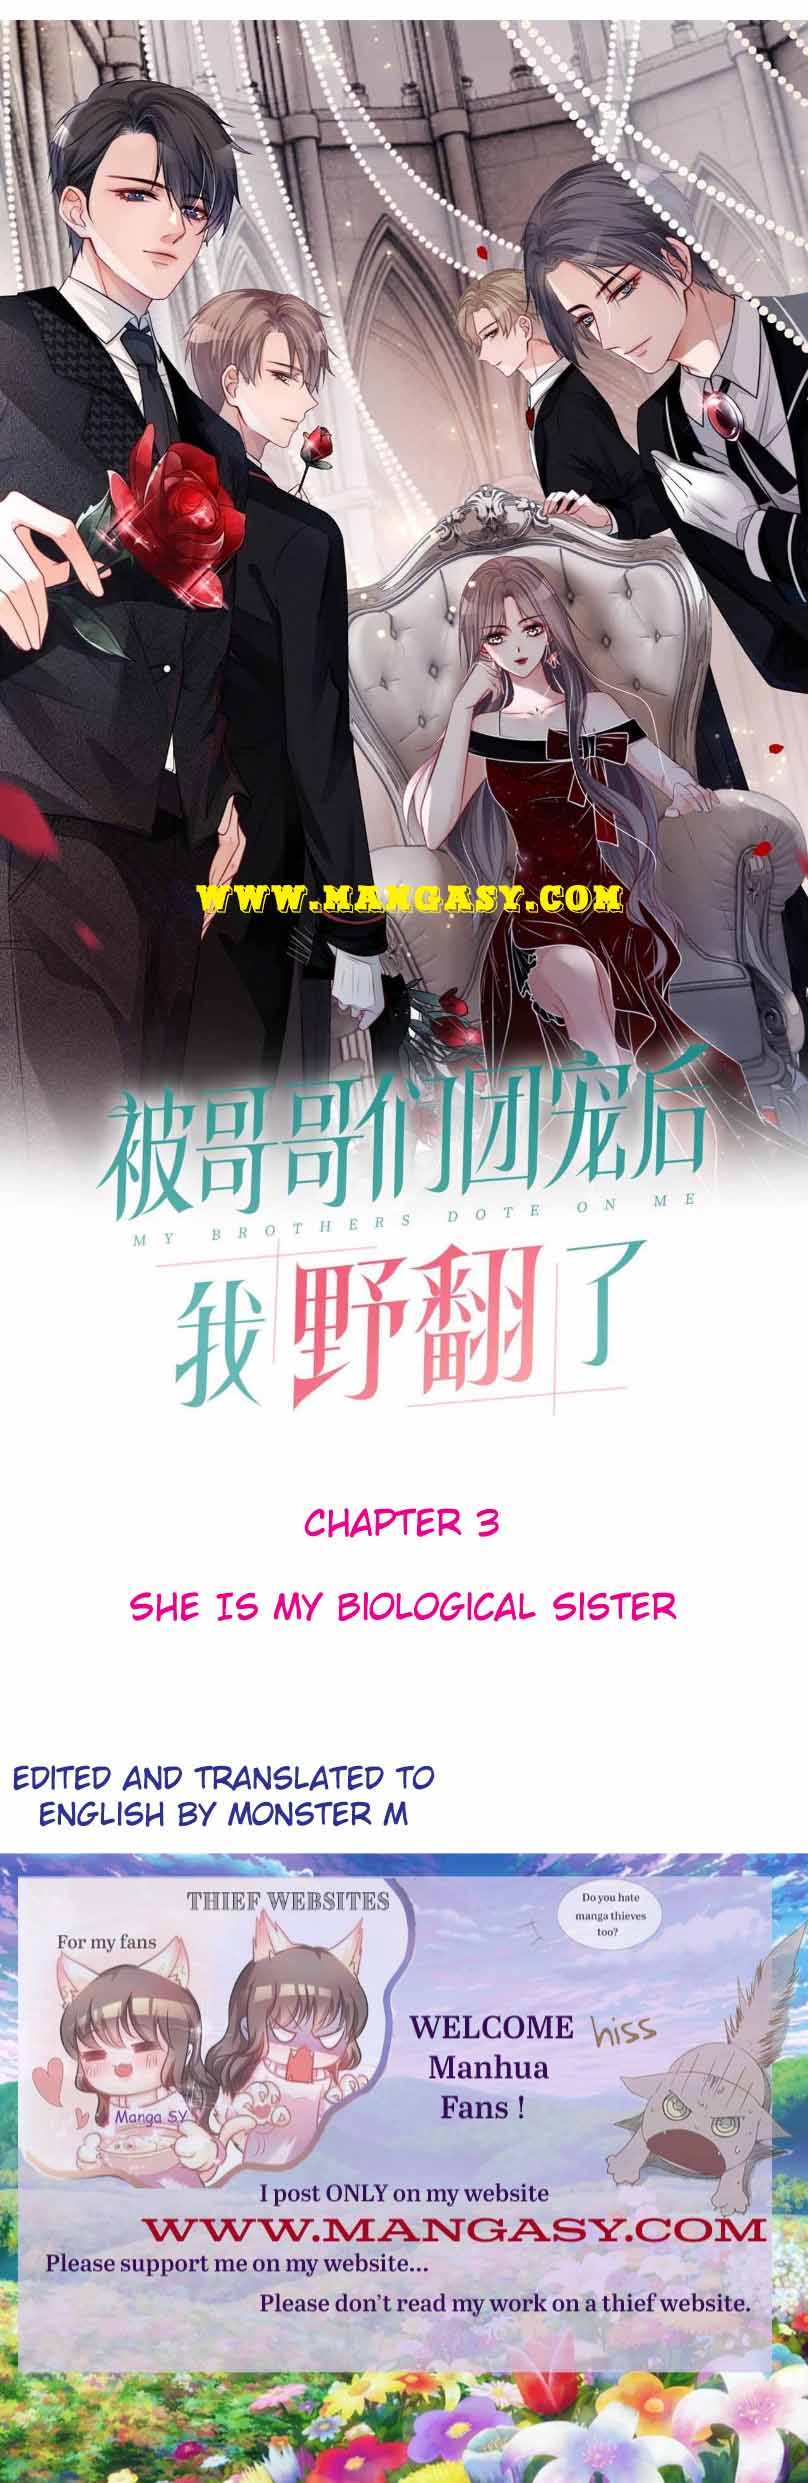 My Brothers Dote On Me chapter 3